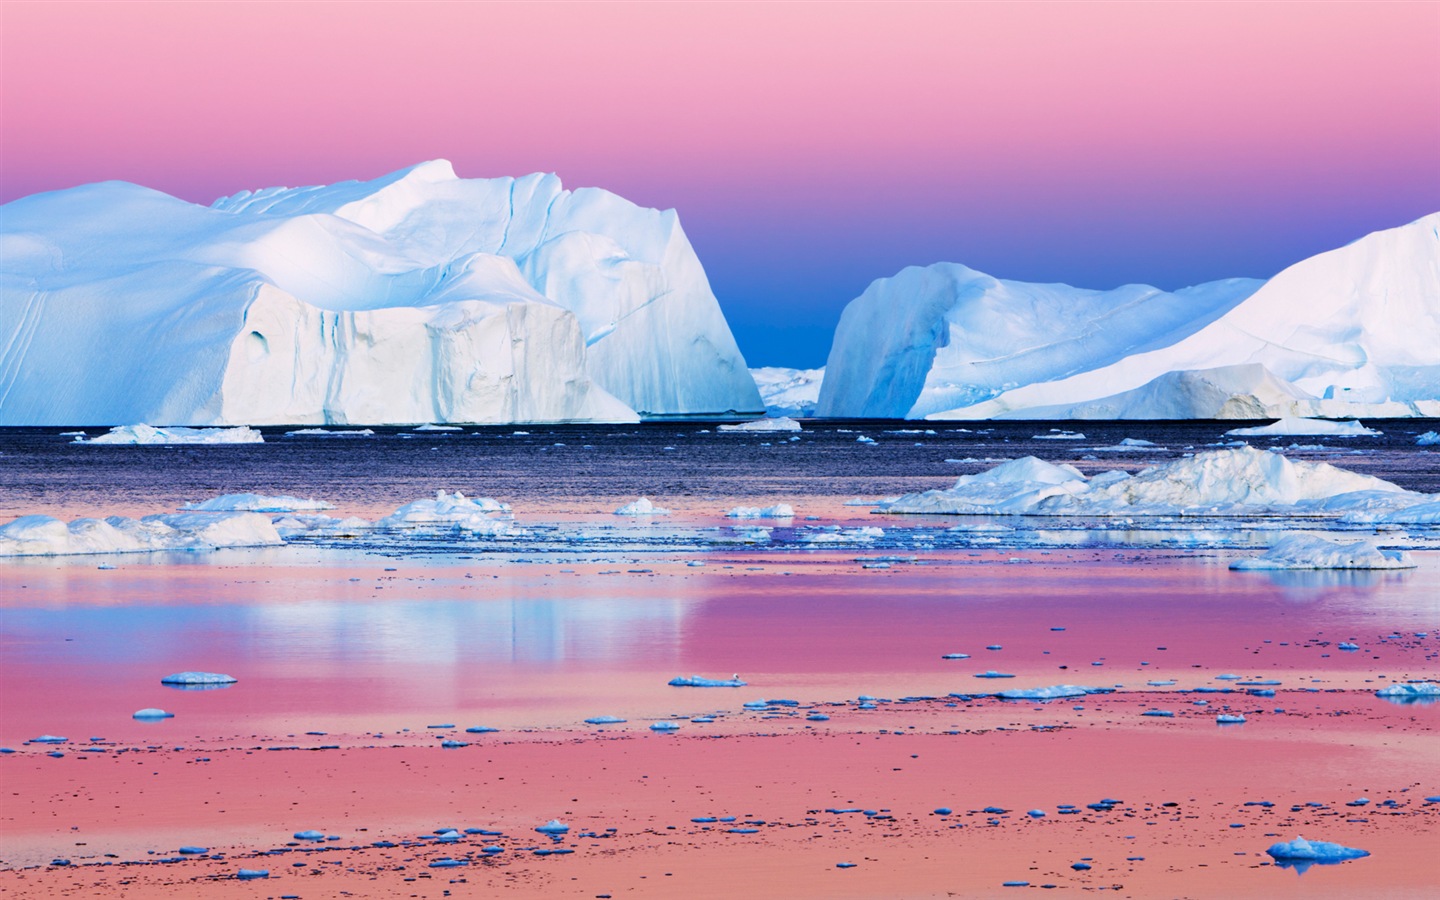 Windows 8 Wallpapers: Arctic, the nature ecological landscape, arctic animals #7 - 1440x900